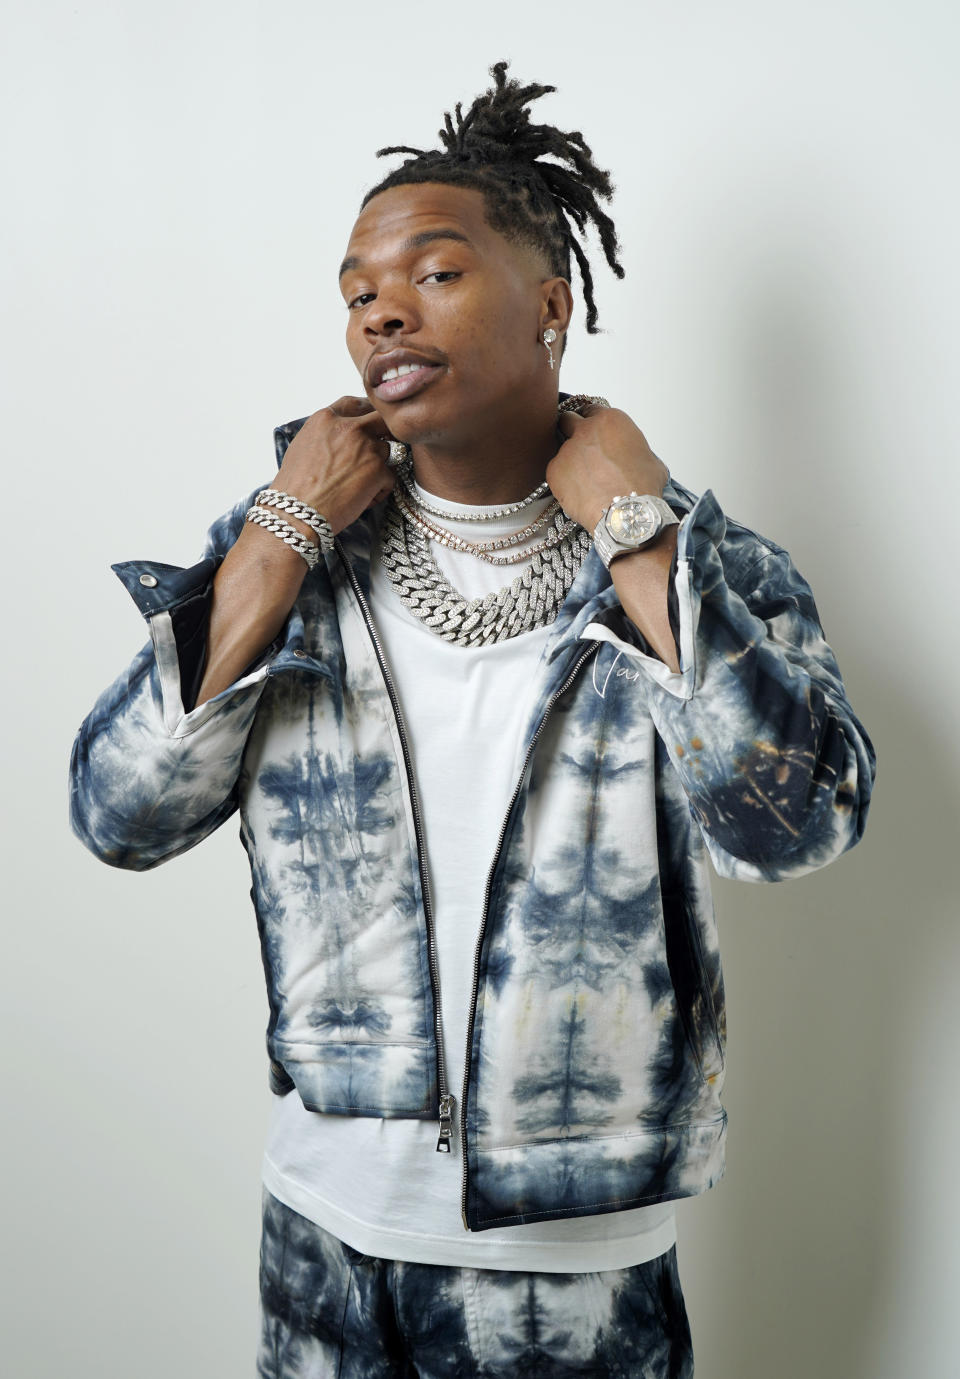 Rapper Lil Baby poses for a portrait on Wednesday, Oct. 5, 2022, in Los Angeles to promote his third studio album “It’s Only Me." (AP Photo/Chris Pizzello)